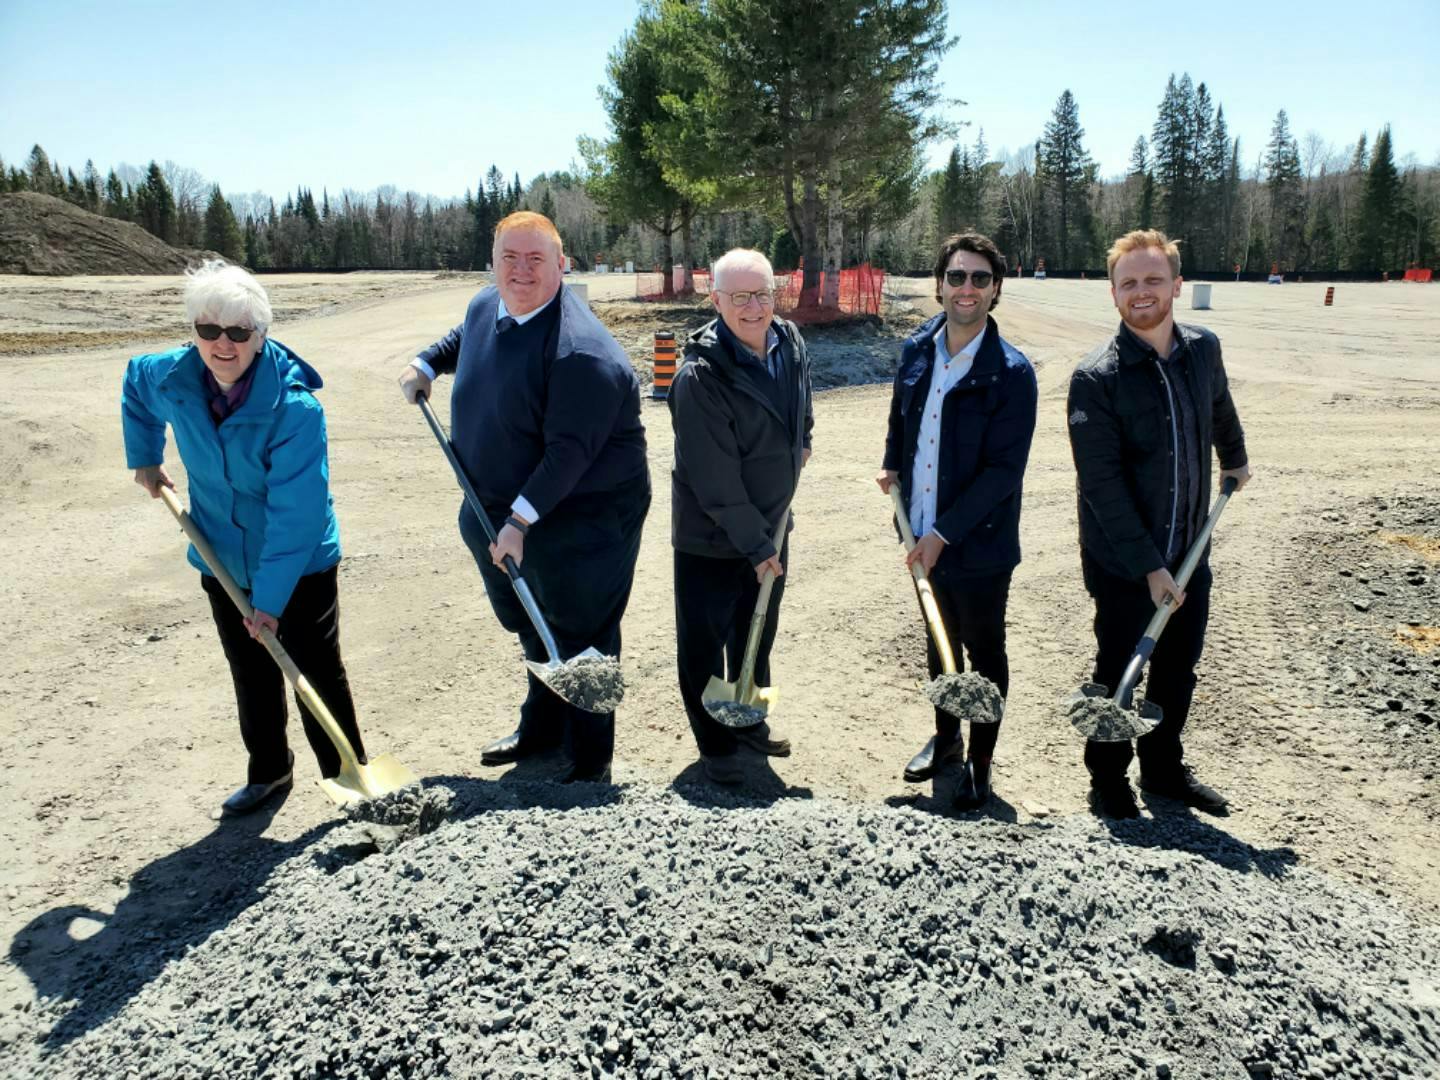 Fundraising Committee_shovels filed with dirt.jpg